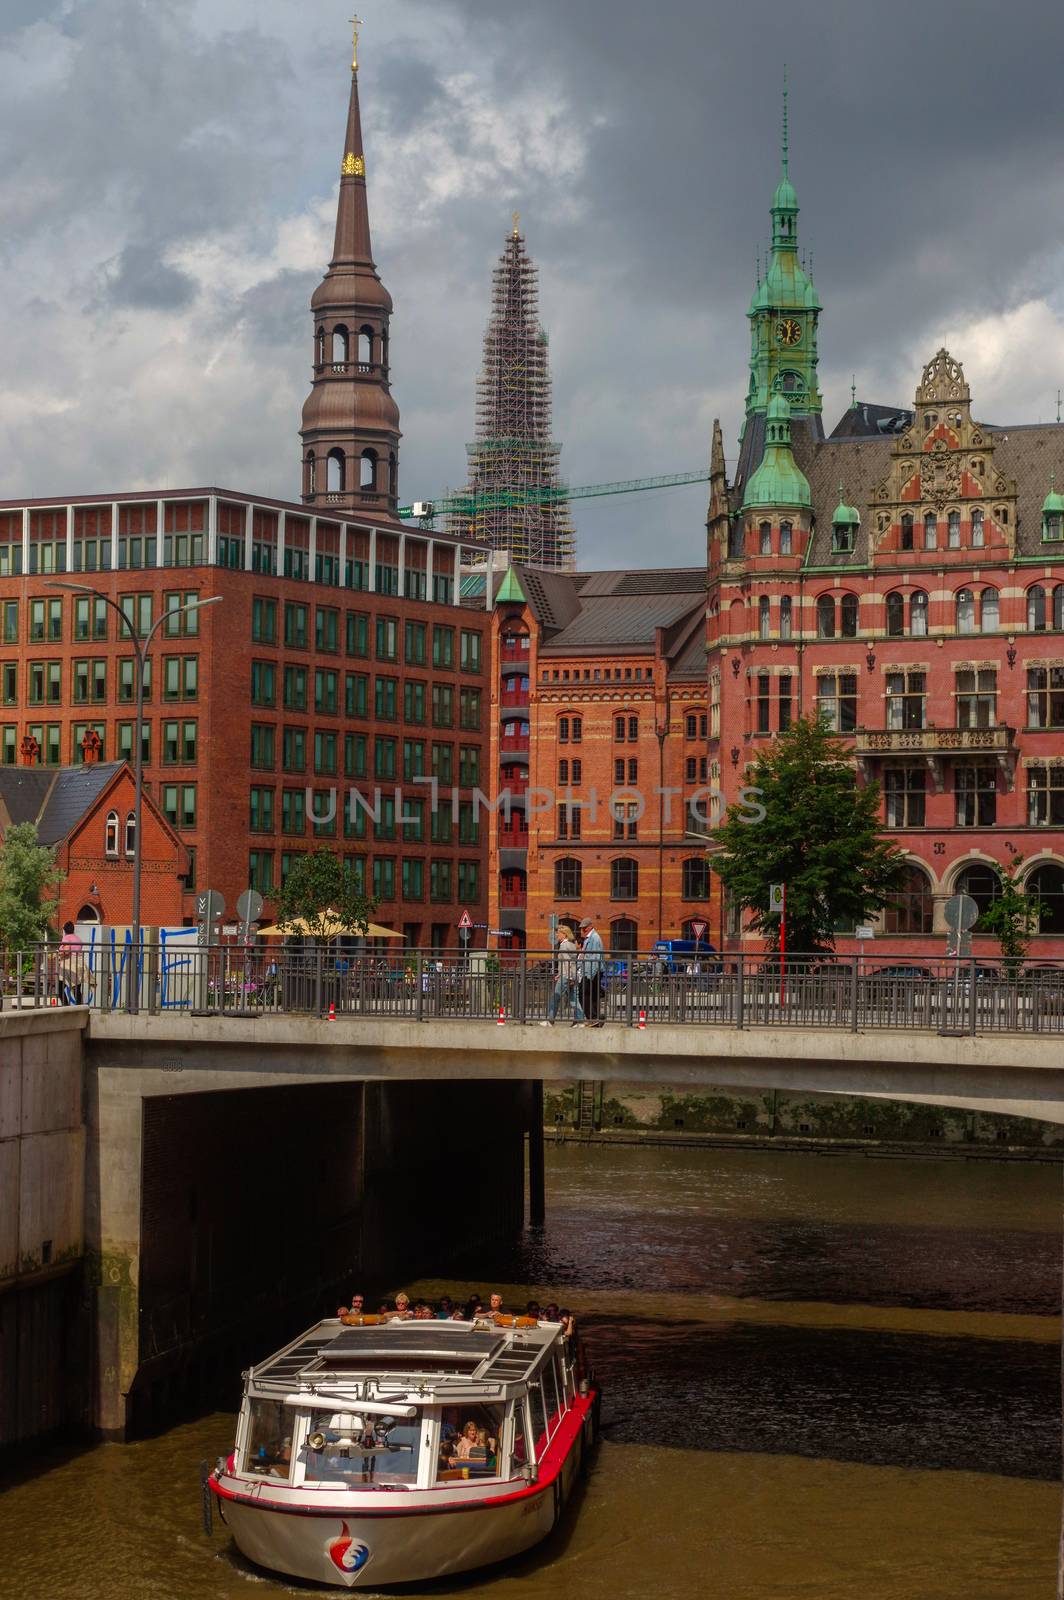 HAMBURG, GERMANY - JULY 18, 2015: ferry on the canal of Historic Speicherstadt houses and bridges at evening with amaising skyview over warehouses, famous place Elbe river. by evolutionnow